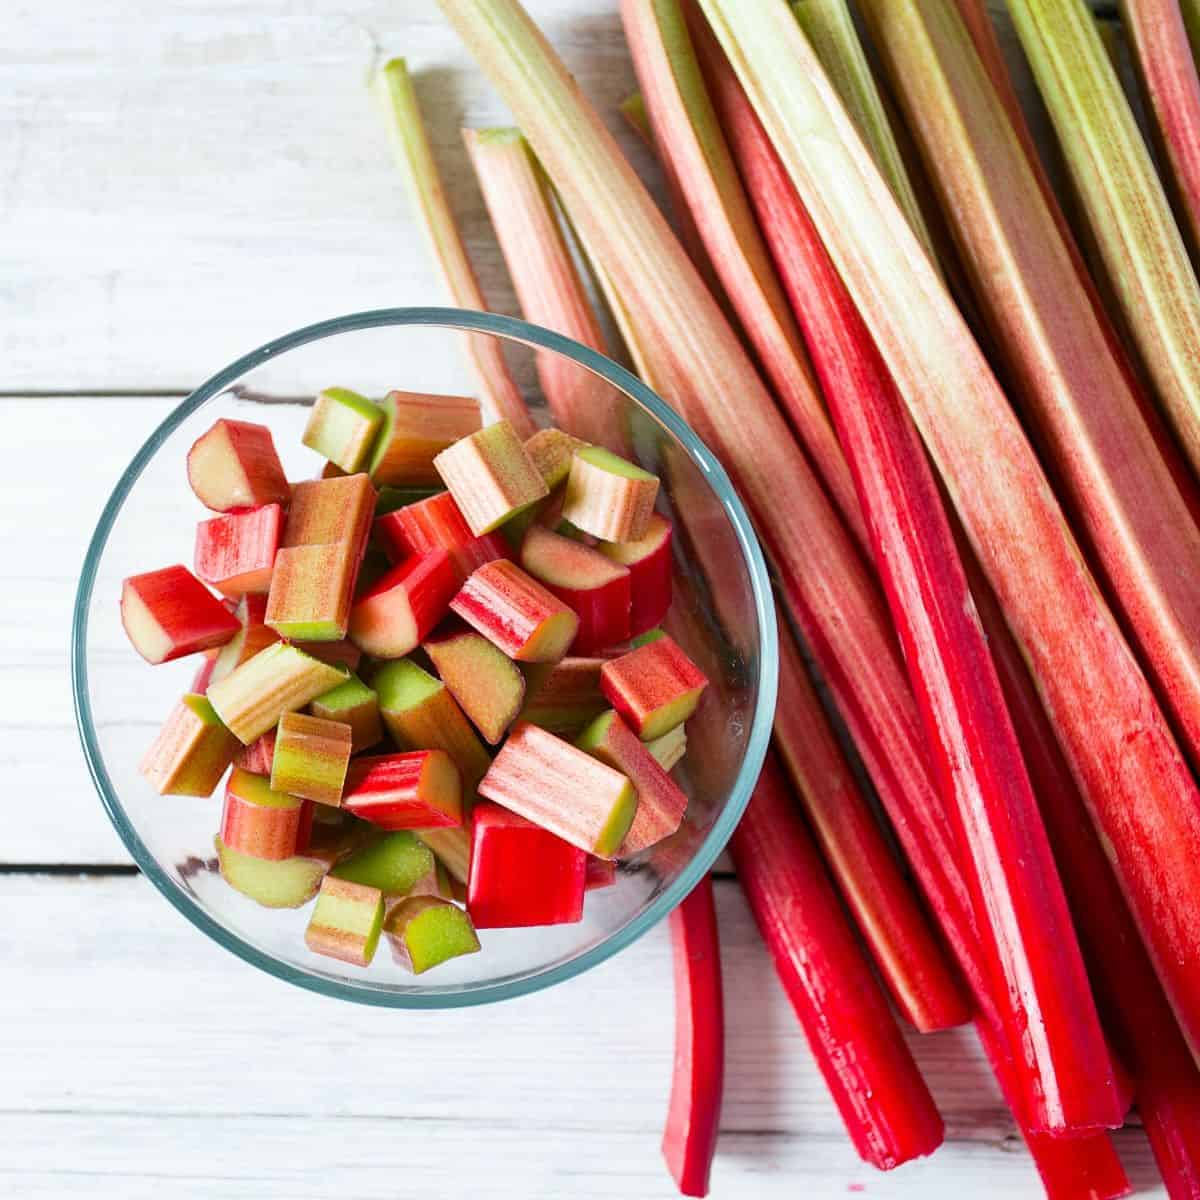 What Does Rhubarb Taste Like and What Is It?